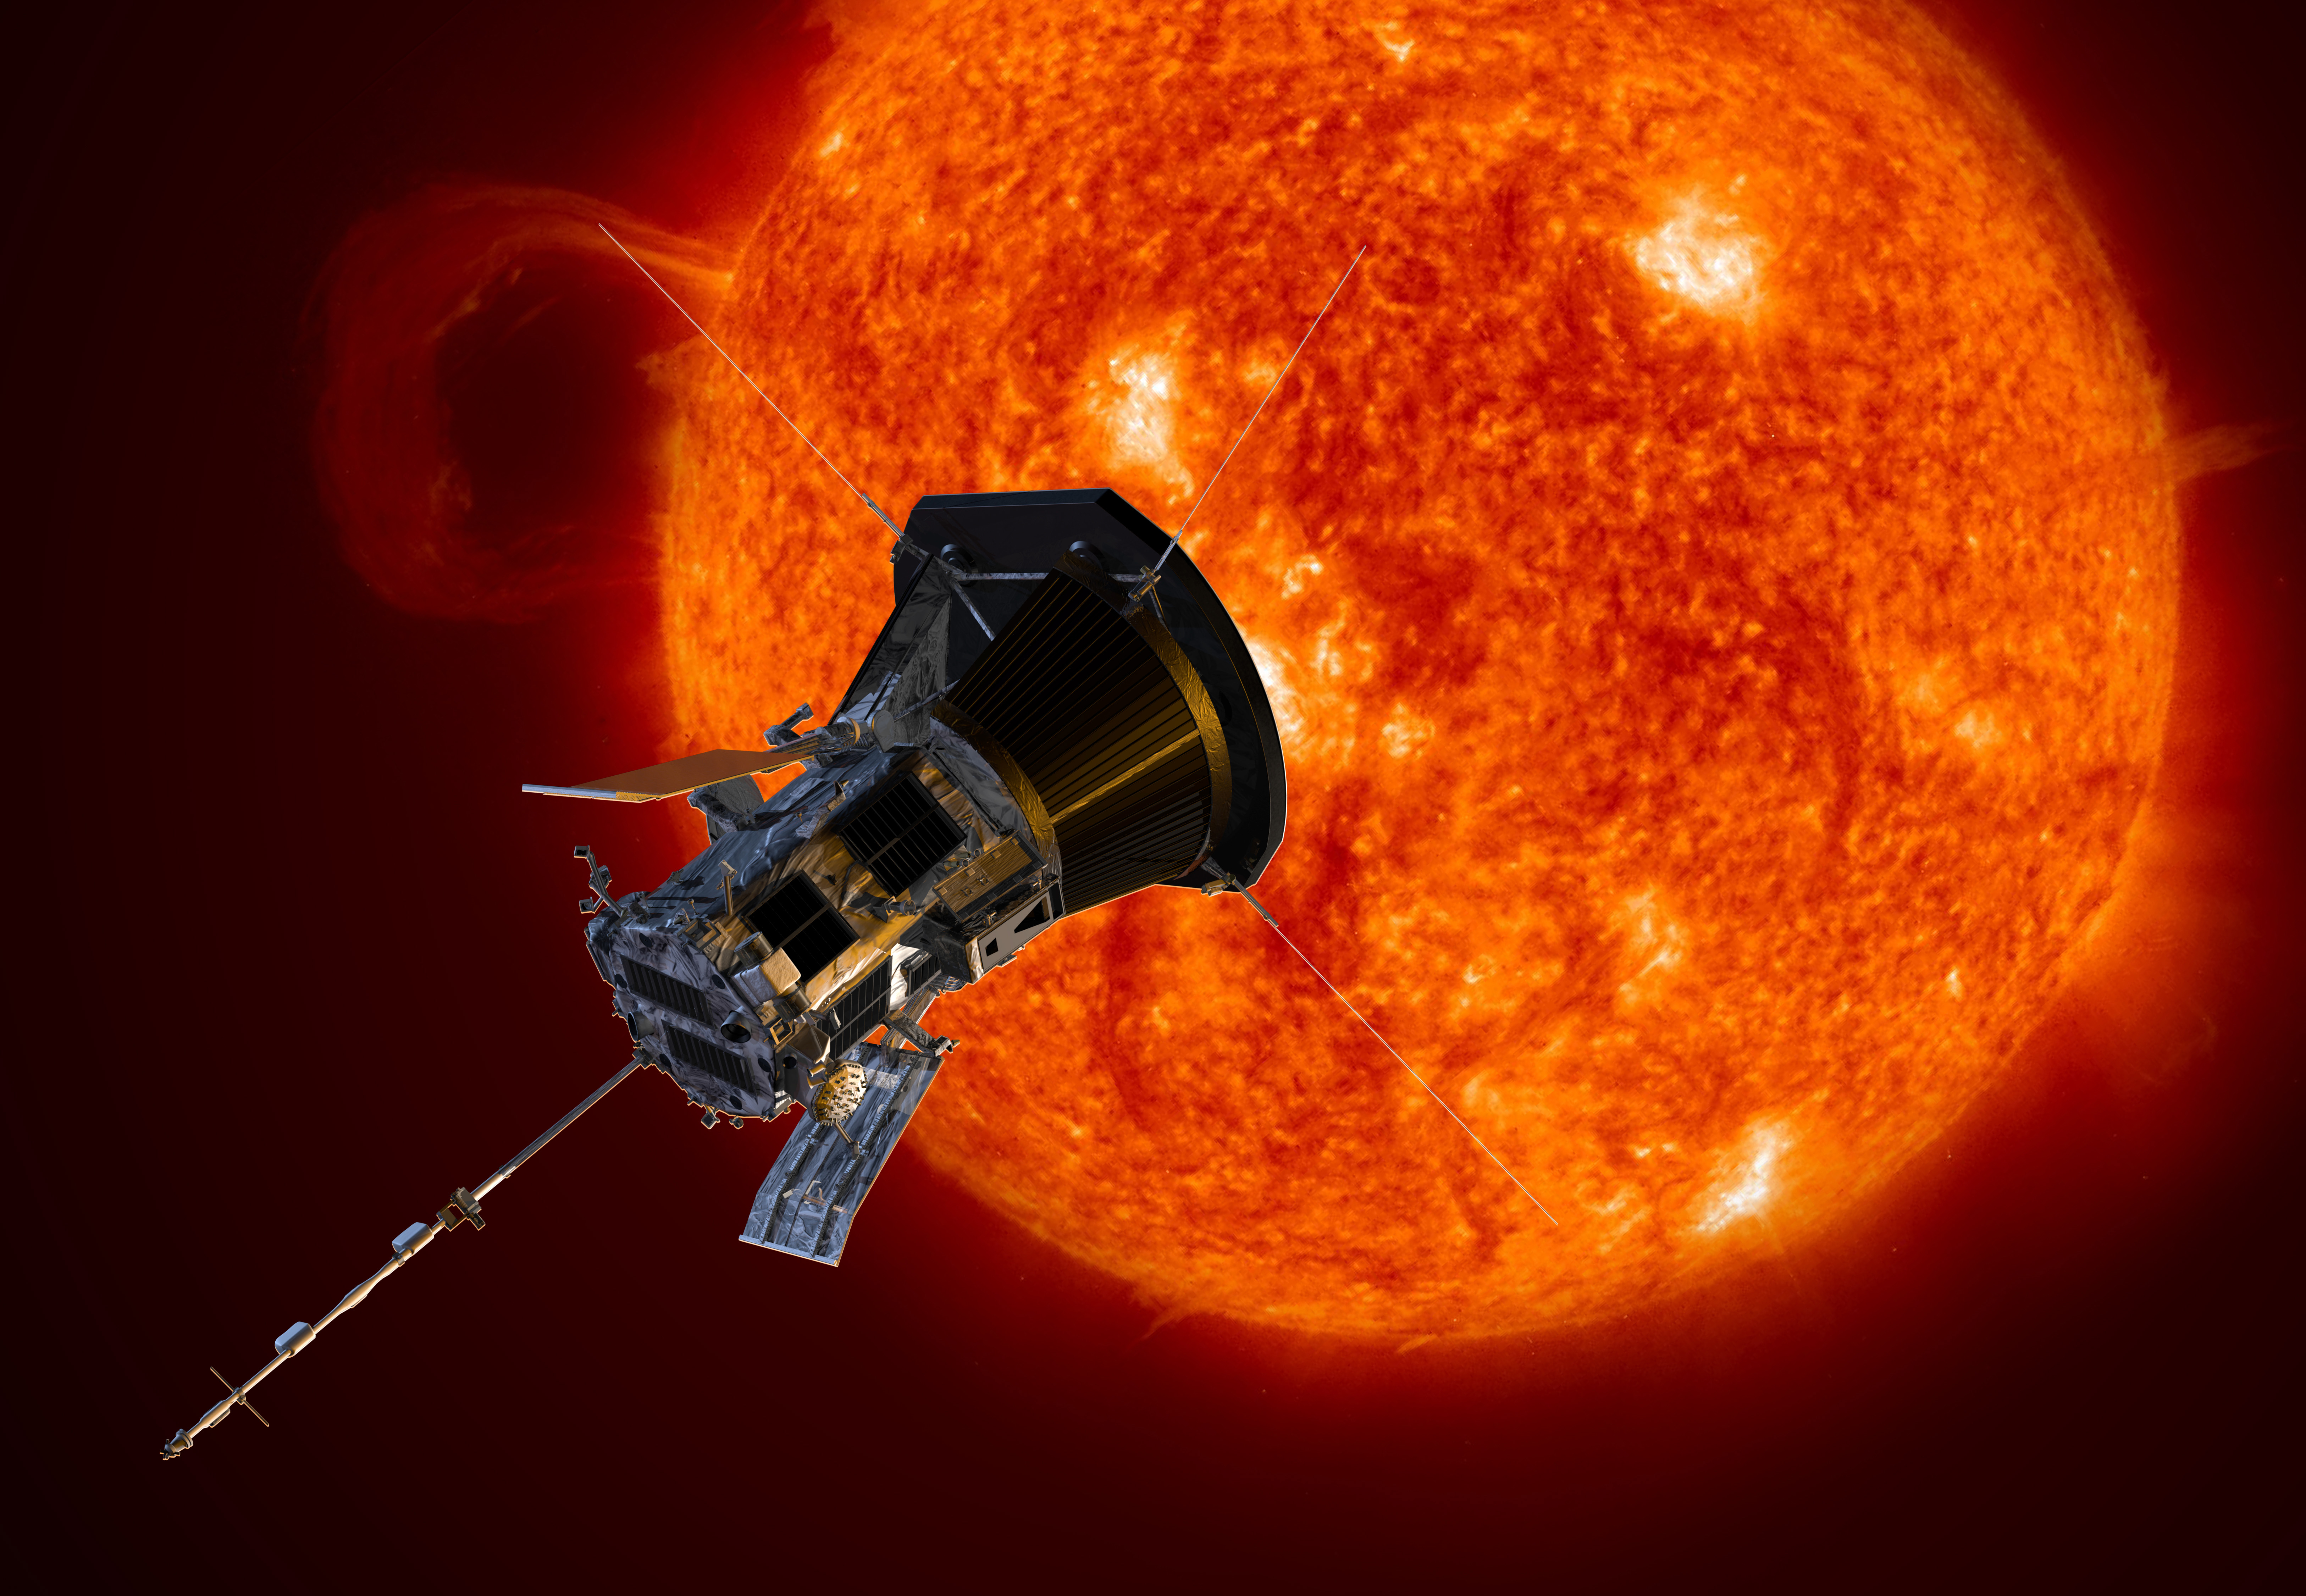 Parker Solar Probe in front of the Sun, which is emitting a large arc of plasma